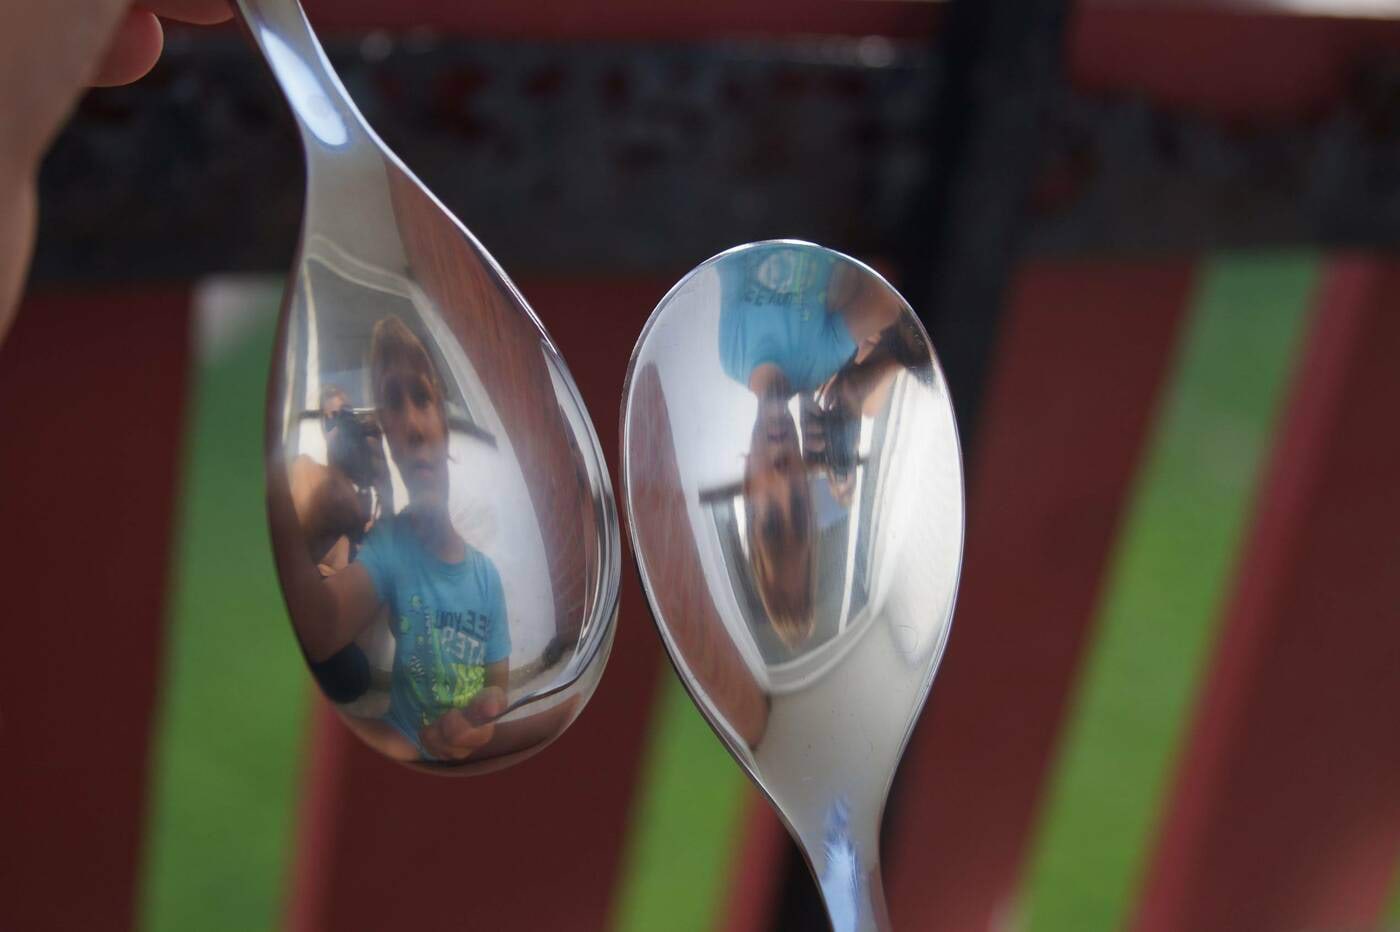 Reflections on a spoon